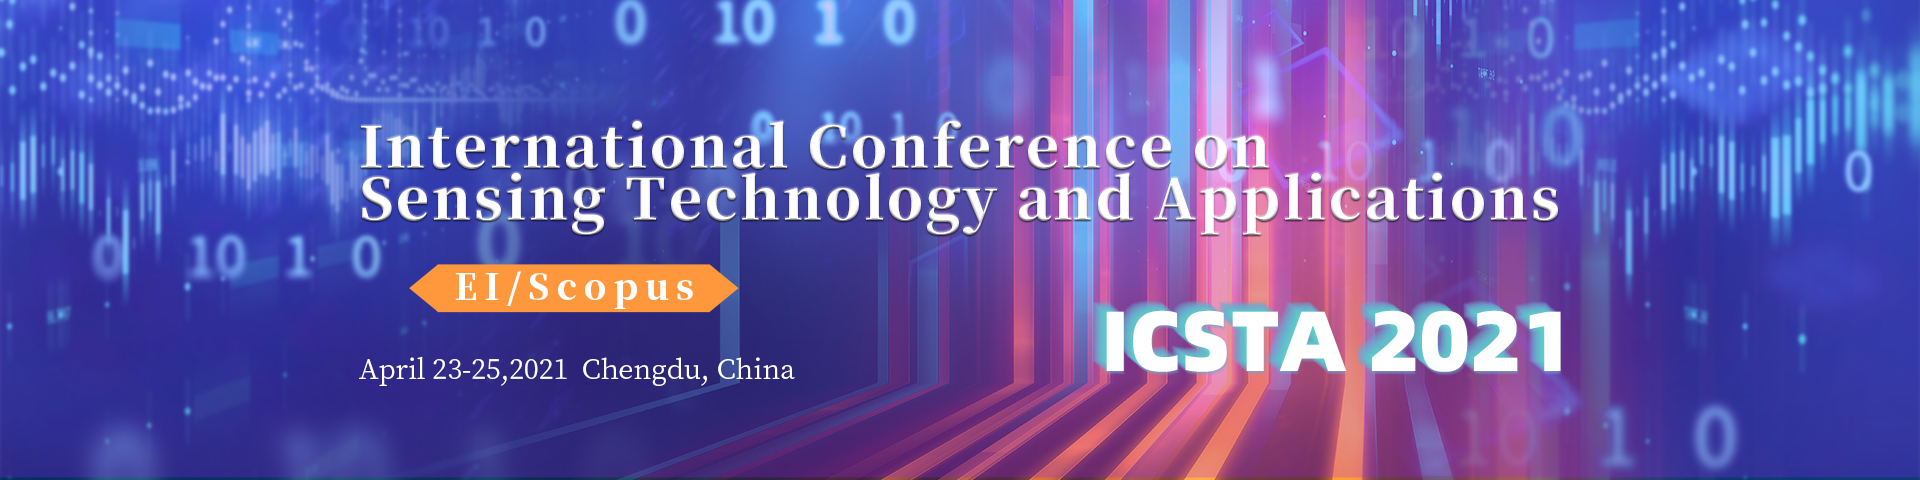 The 2021 International Conference on Sensing Technology and Applications